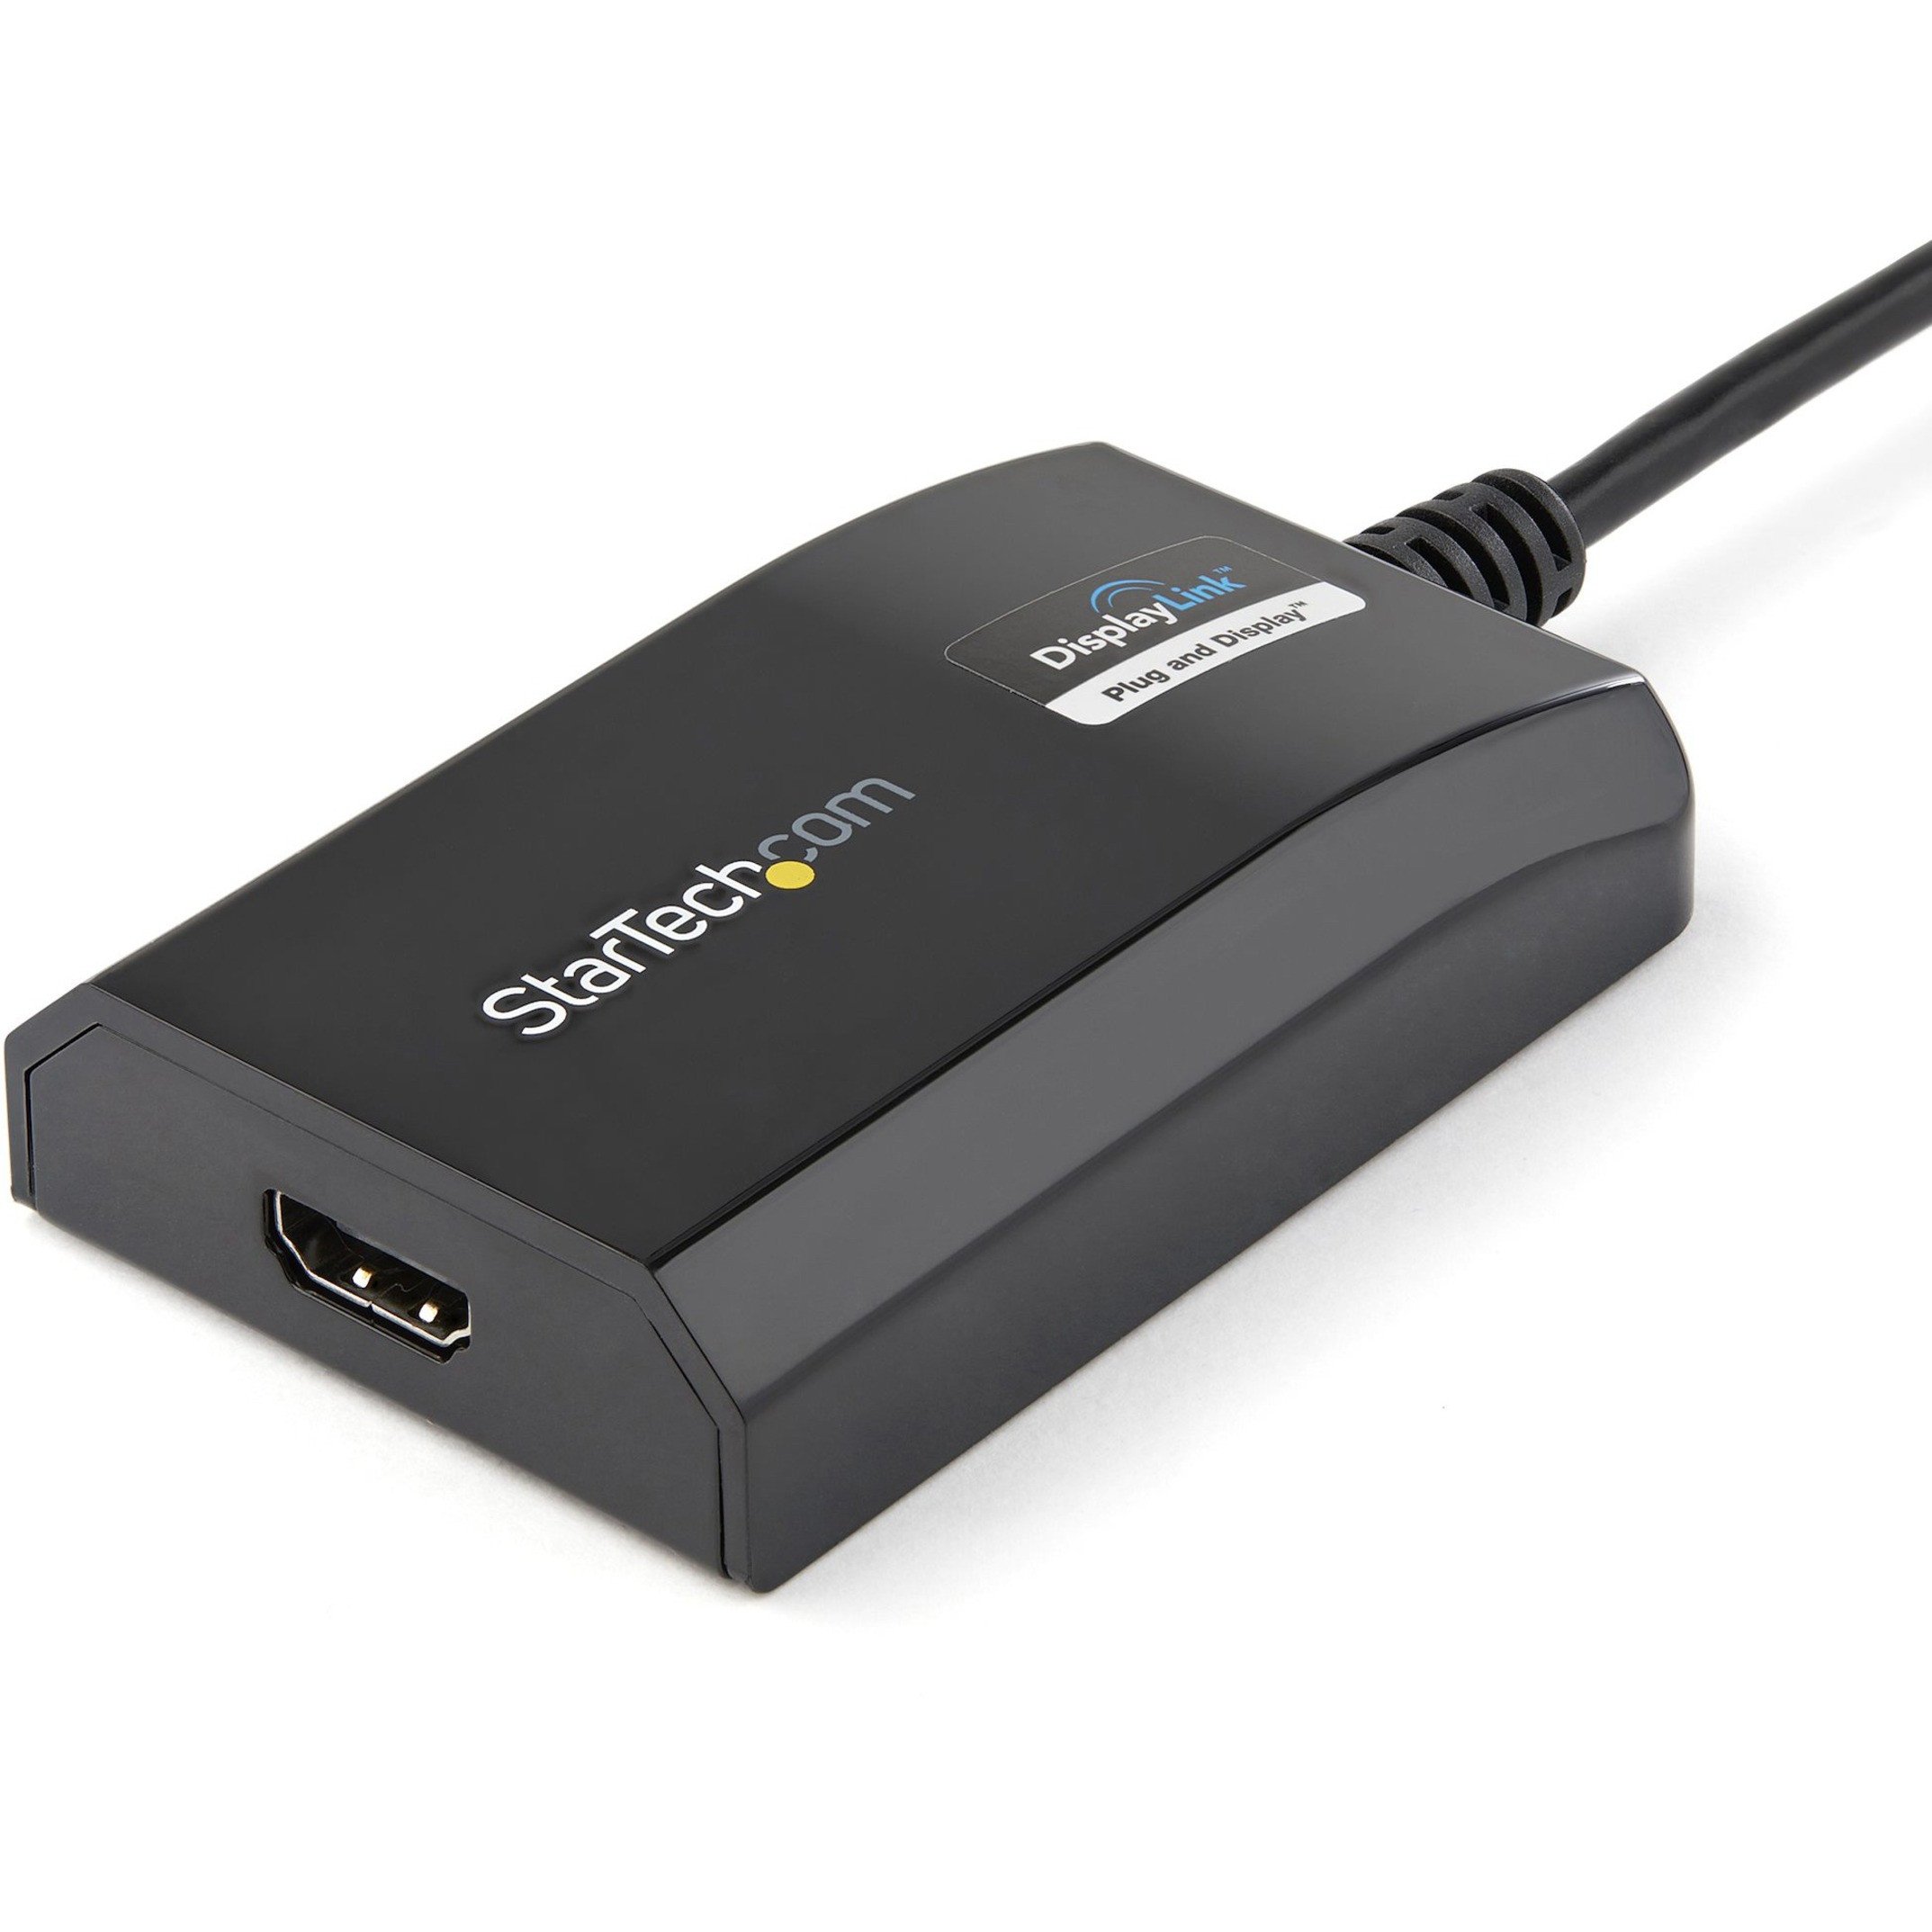 blok Bekendtgørelse Intakt Startech .com USB 3.0 to HDMI Adapter, DisplayLink Certified, 1920x1200, USB-A  to HDMI Display Adapter, External Graphics Card for Mac/PCUS... USB32HDPRO  - Corporate Armor